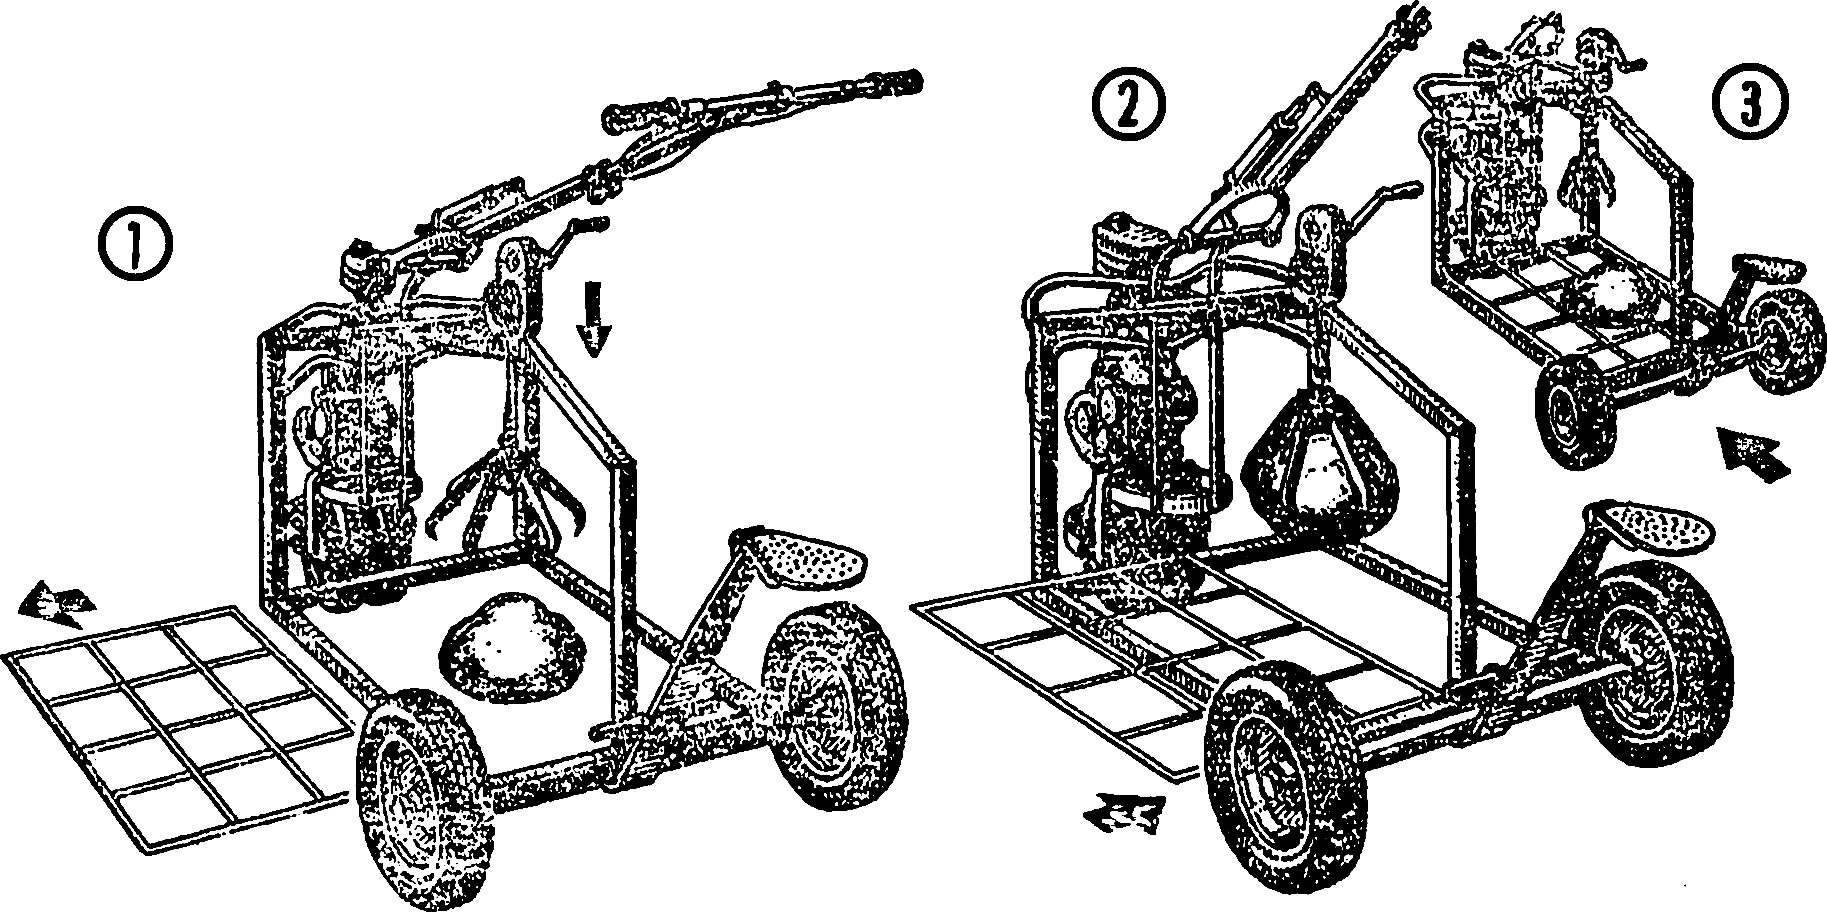 Fig. 7. The use of the cultivator on the export of boulders.